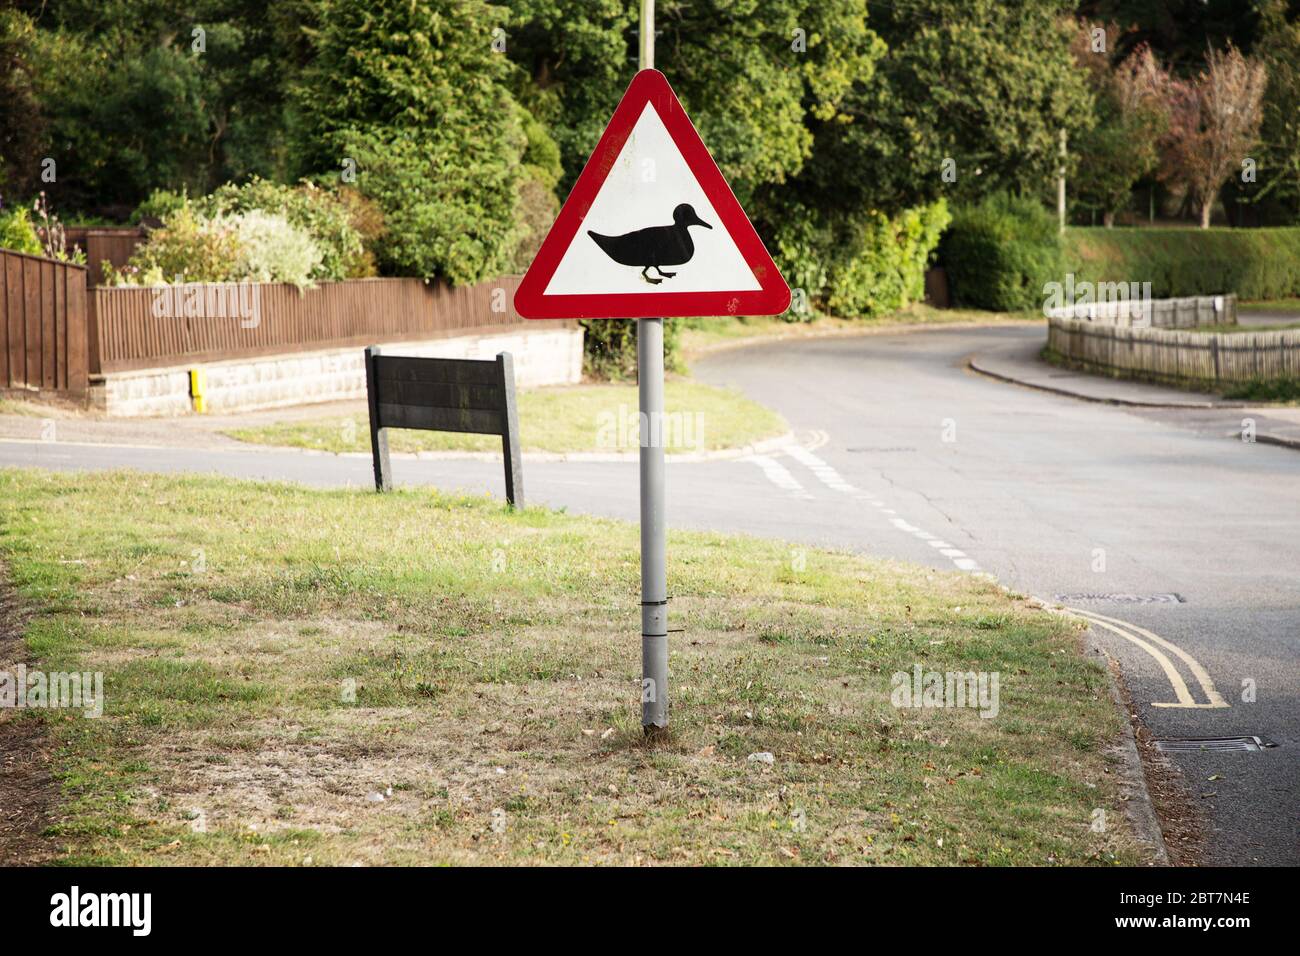 road sign on a street road of a duck cross point coming up Stock Photo